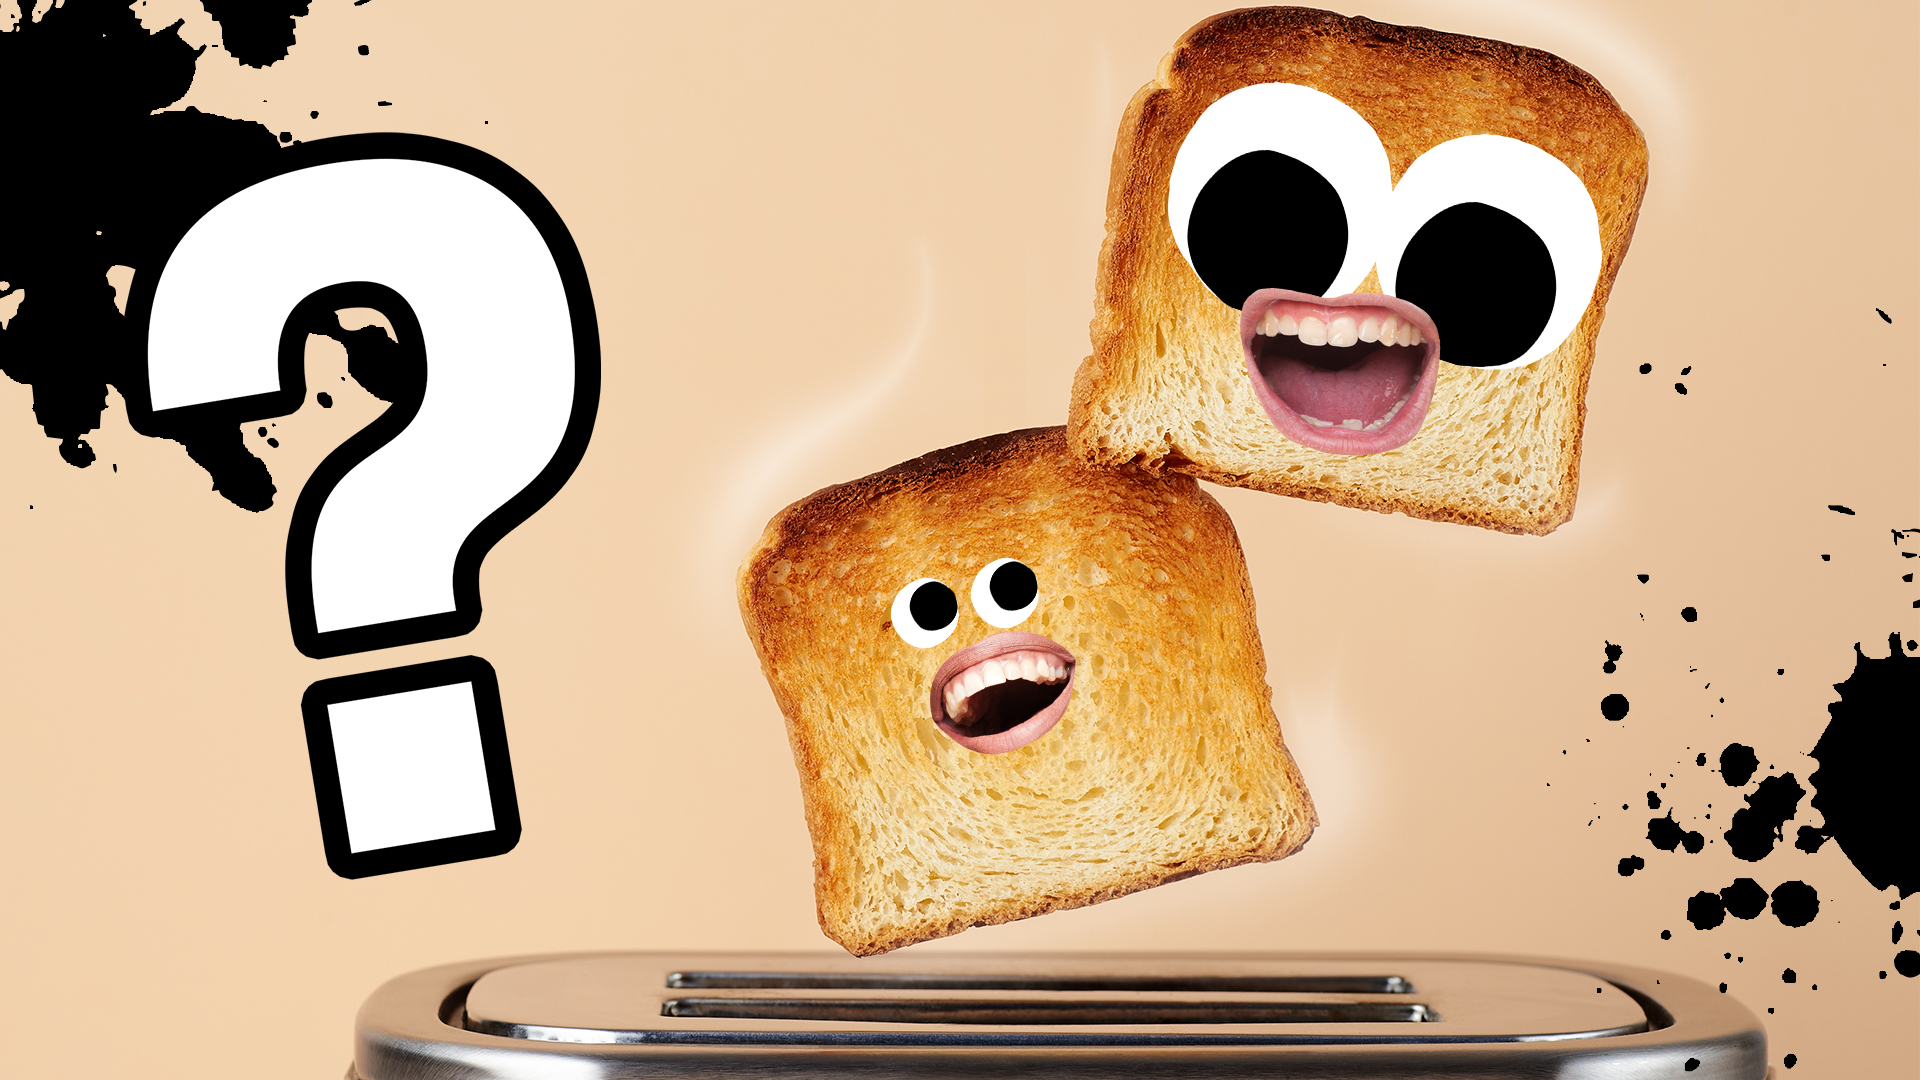 Toast with faces pops out of a toaster